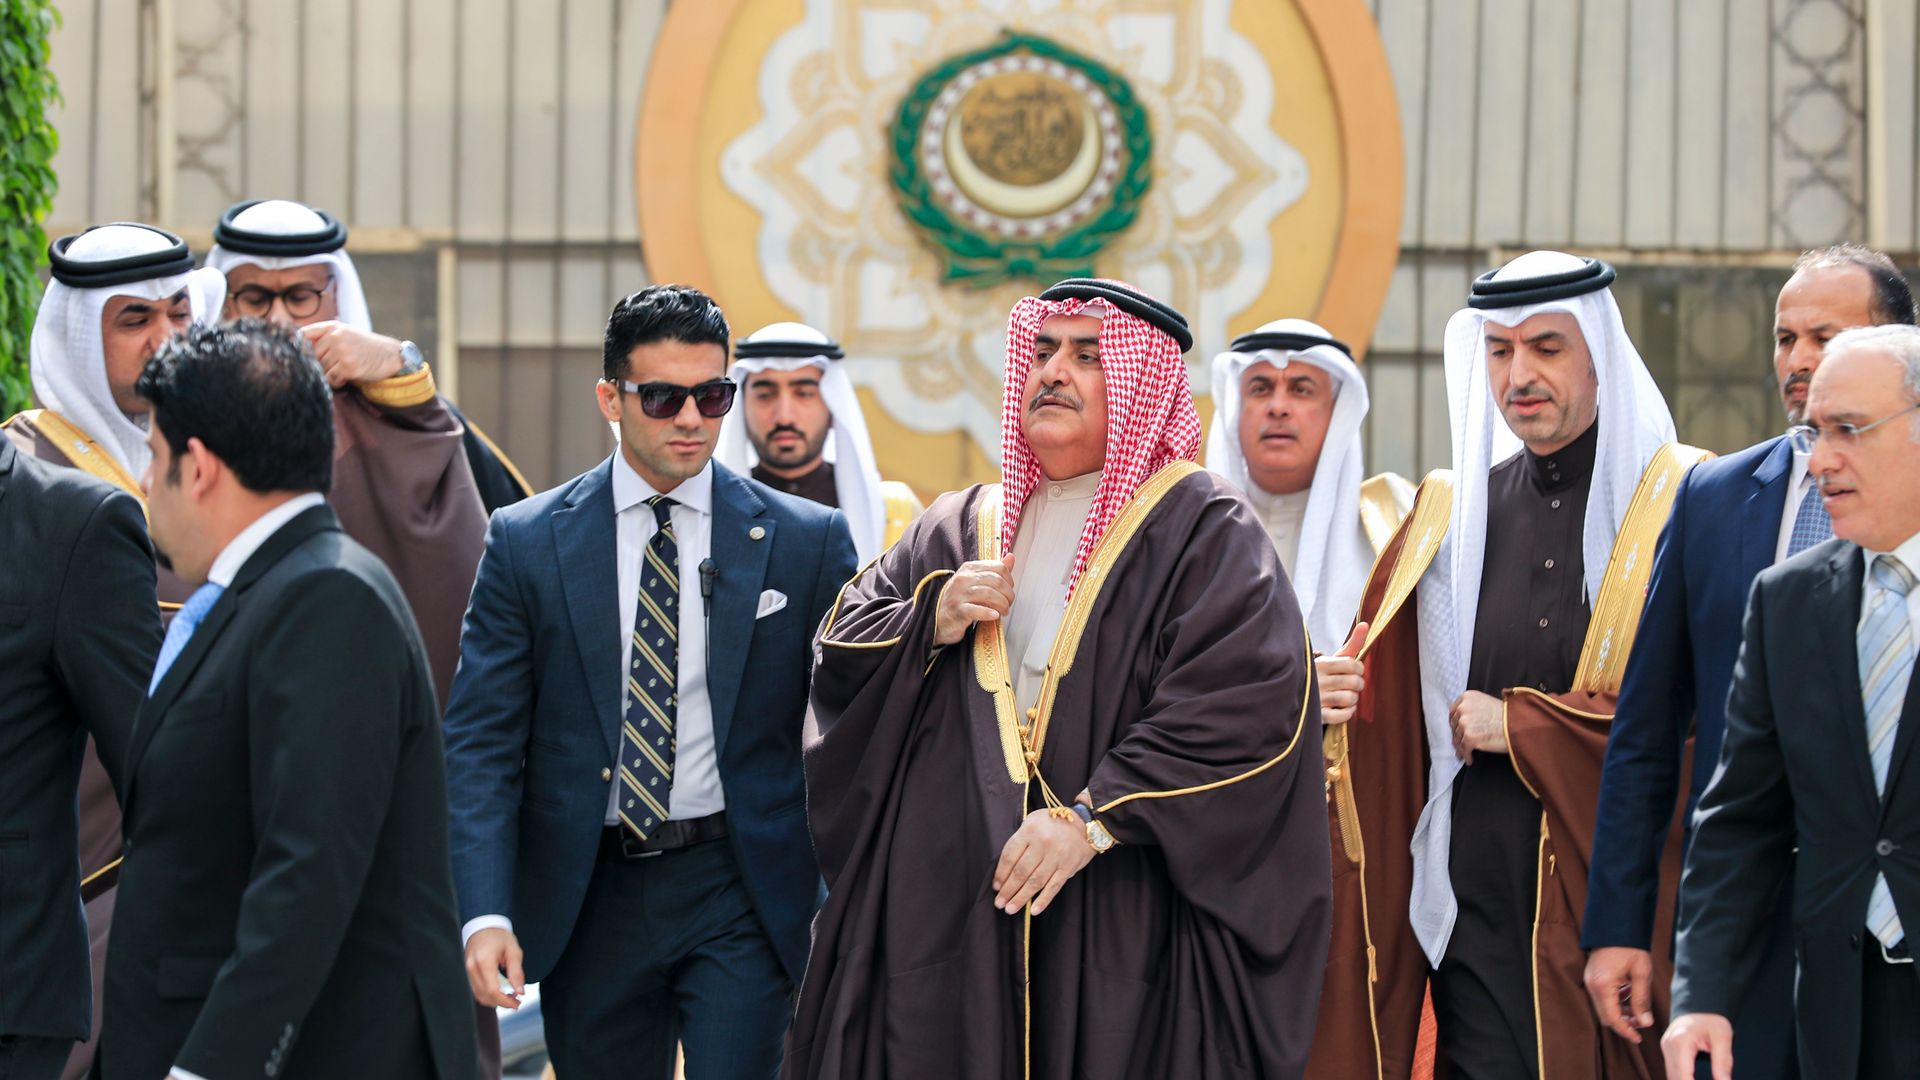 Bahrain's Minister of Foreign Affairs Khalid bin Ahmed al-Khalifa arrives to attend an Arab League emergency meeting discussing the US-brokered proposal for a settlement of the Middle East conflict.